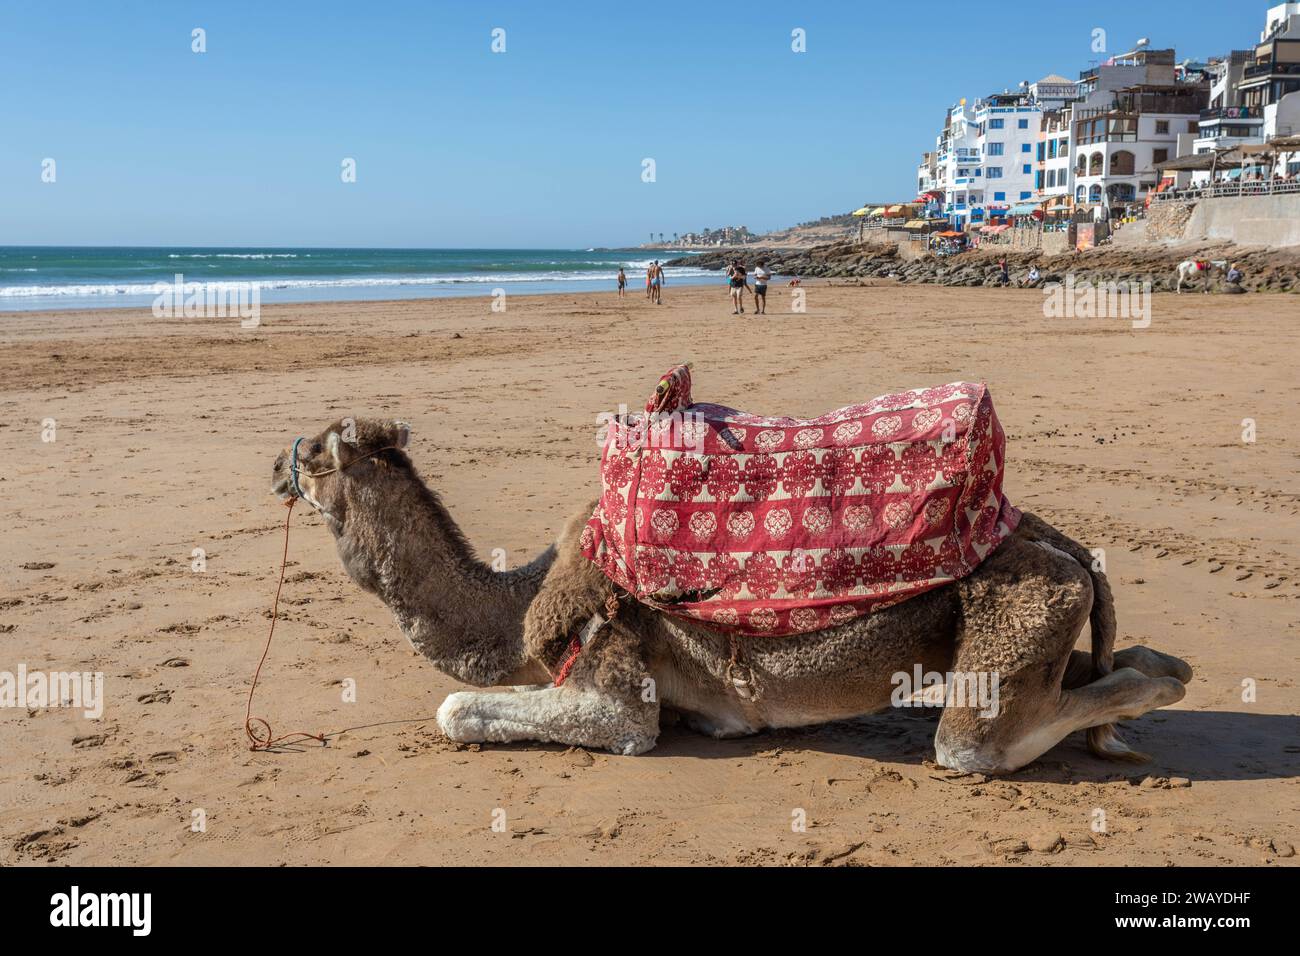 A camel sitting on the beach with the Atlantic Ocean and beachfront buildings in the background, Taghazout, Morocco Stock Photo